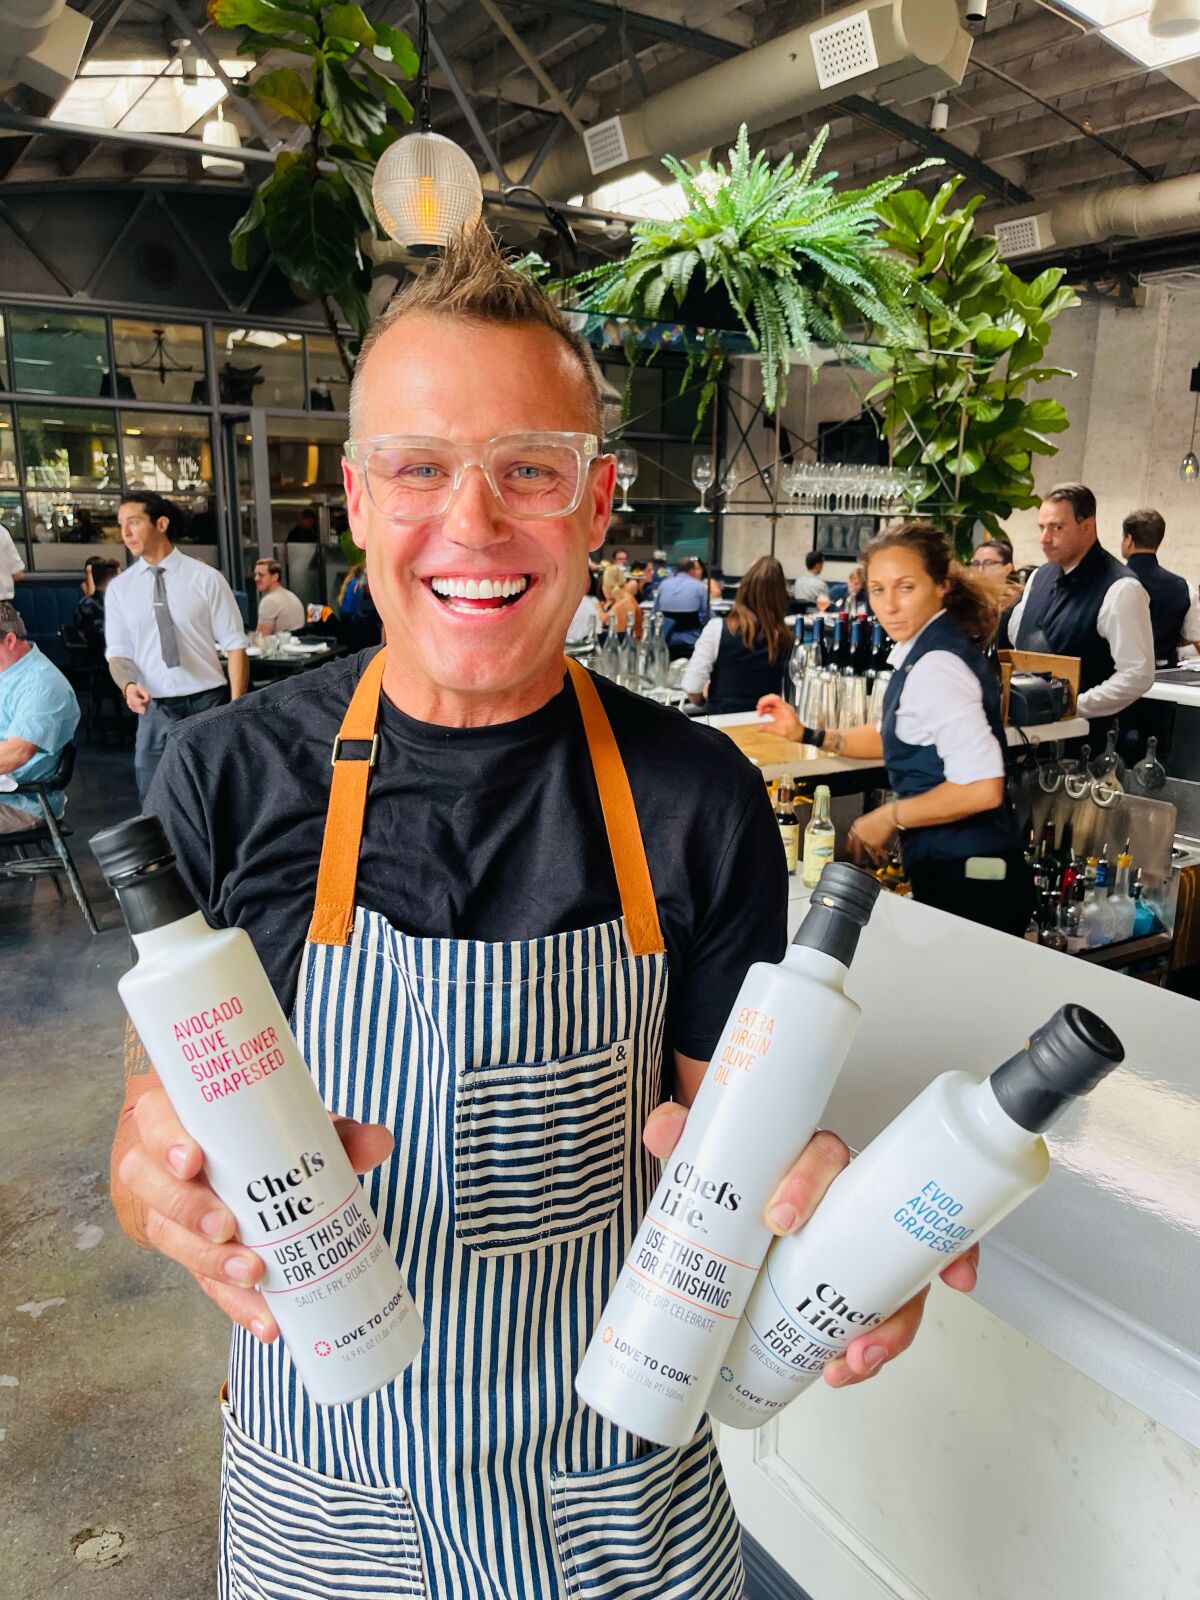 Chef Brian Malarkey with his three Chefs Life products, which were introduced in August.